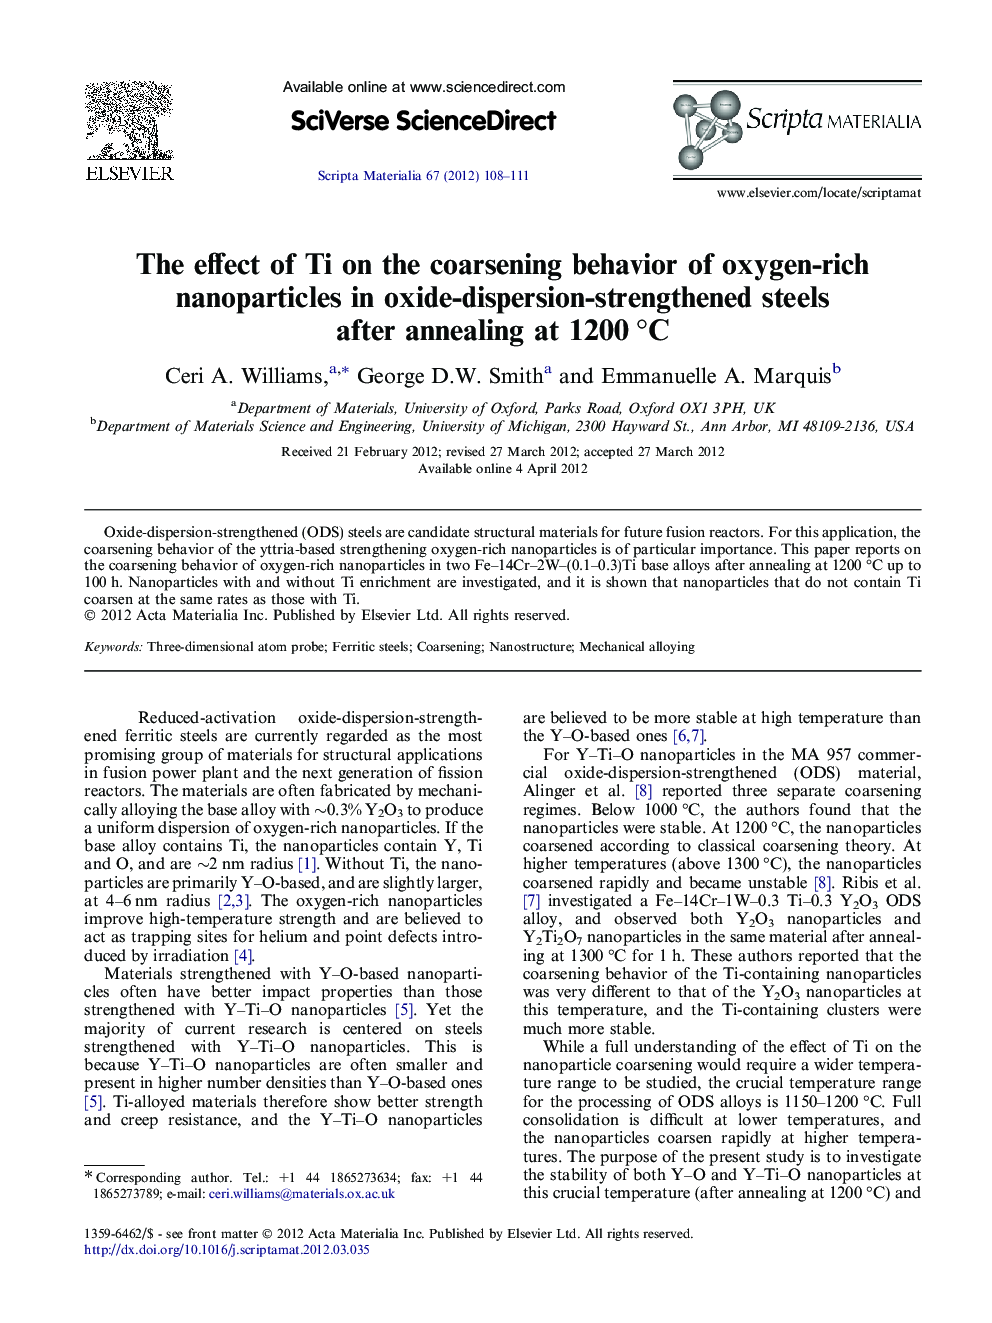 The effect of Ti on the coarsening behavior of oxygen-rich nanoparticles in oxide-dispersion-strengthened steels after annealing at 1200 °C